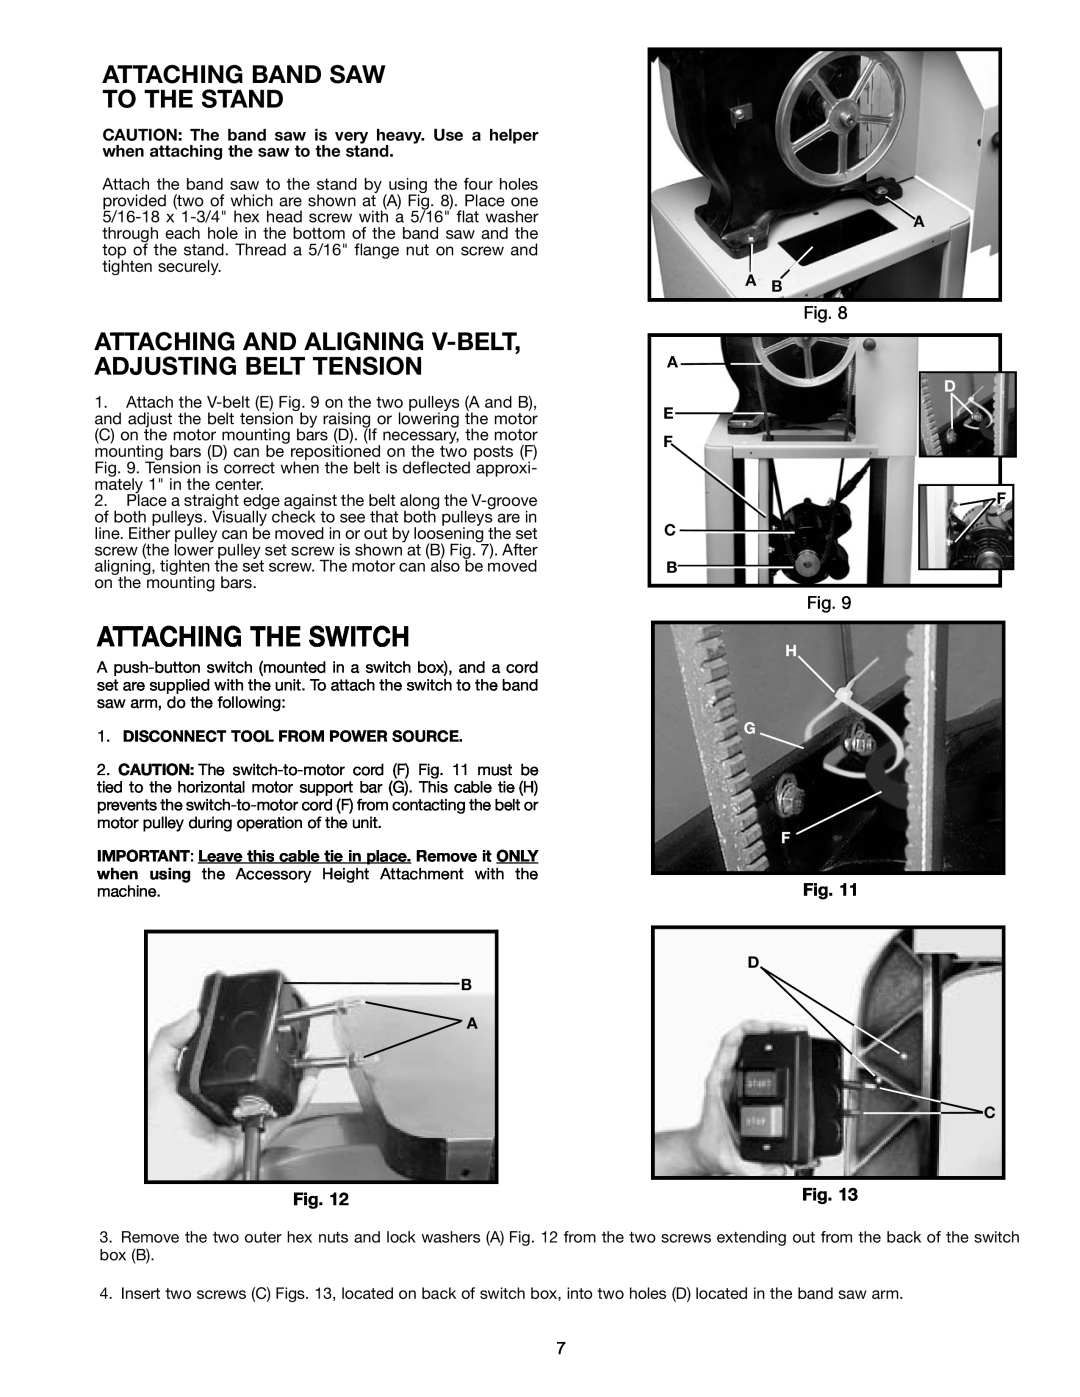 Delta 28-241 Attaching The Switch, Attaching Band Saw To The Stand, Attaching And Aligning V-Belt, Adjusting Belt Tension 